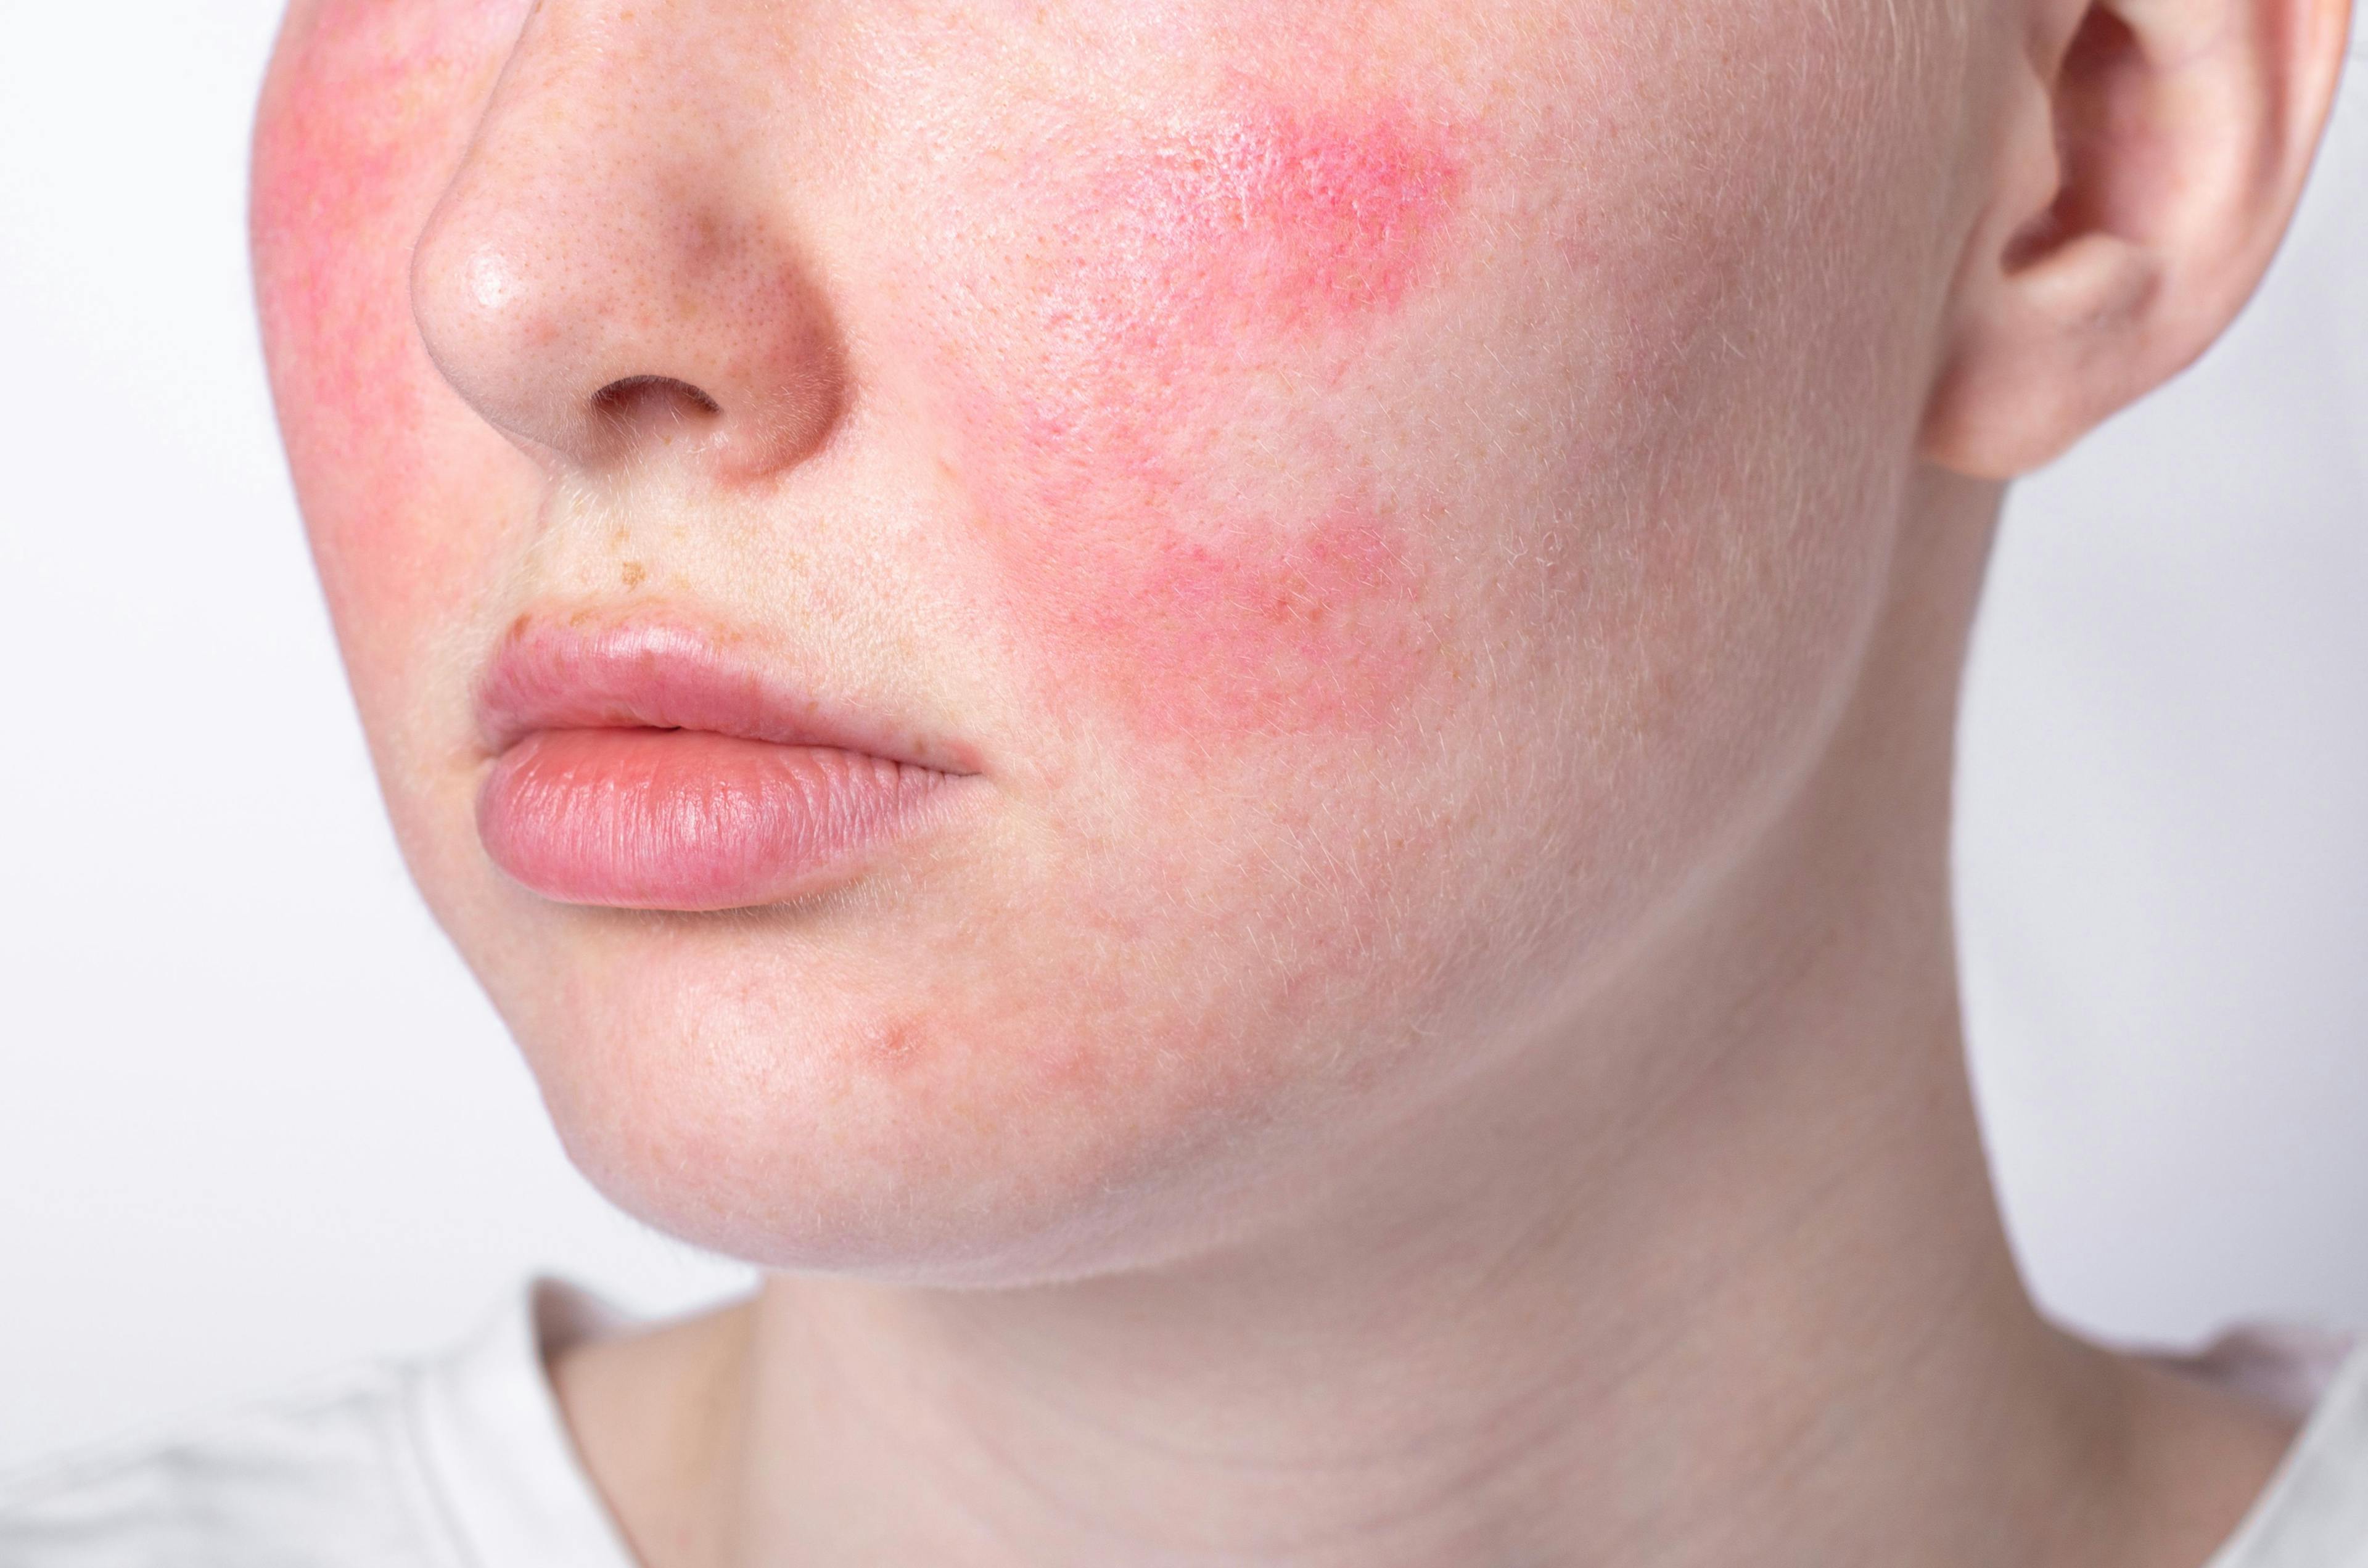 Close-up image of young woman with rosacea on the cheeks